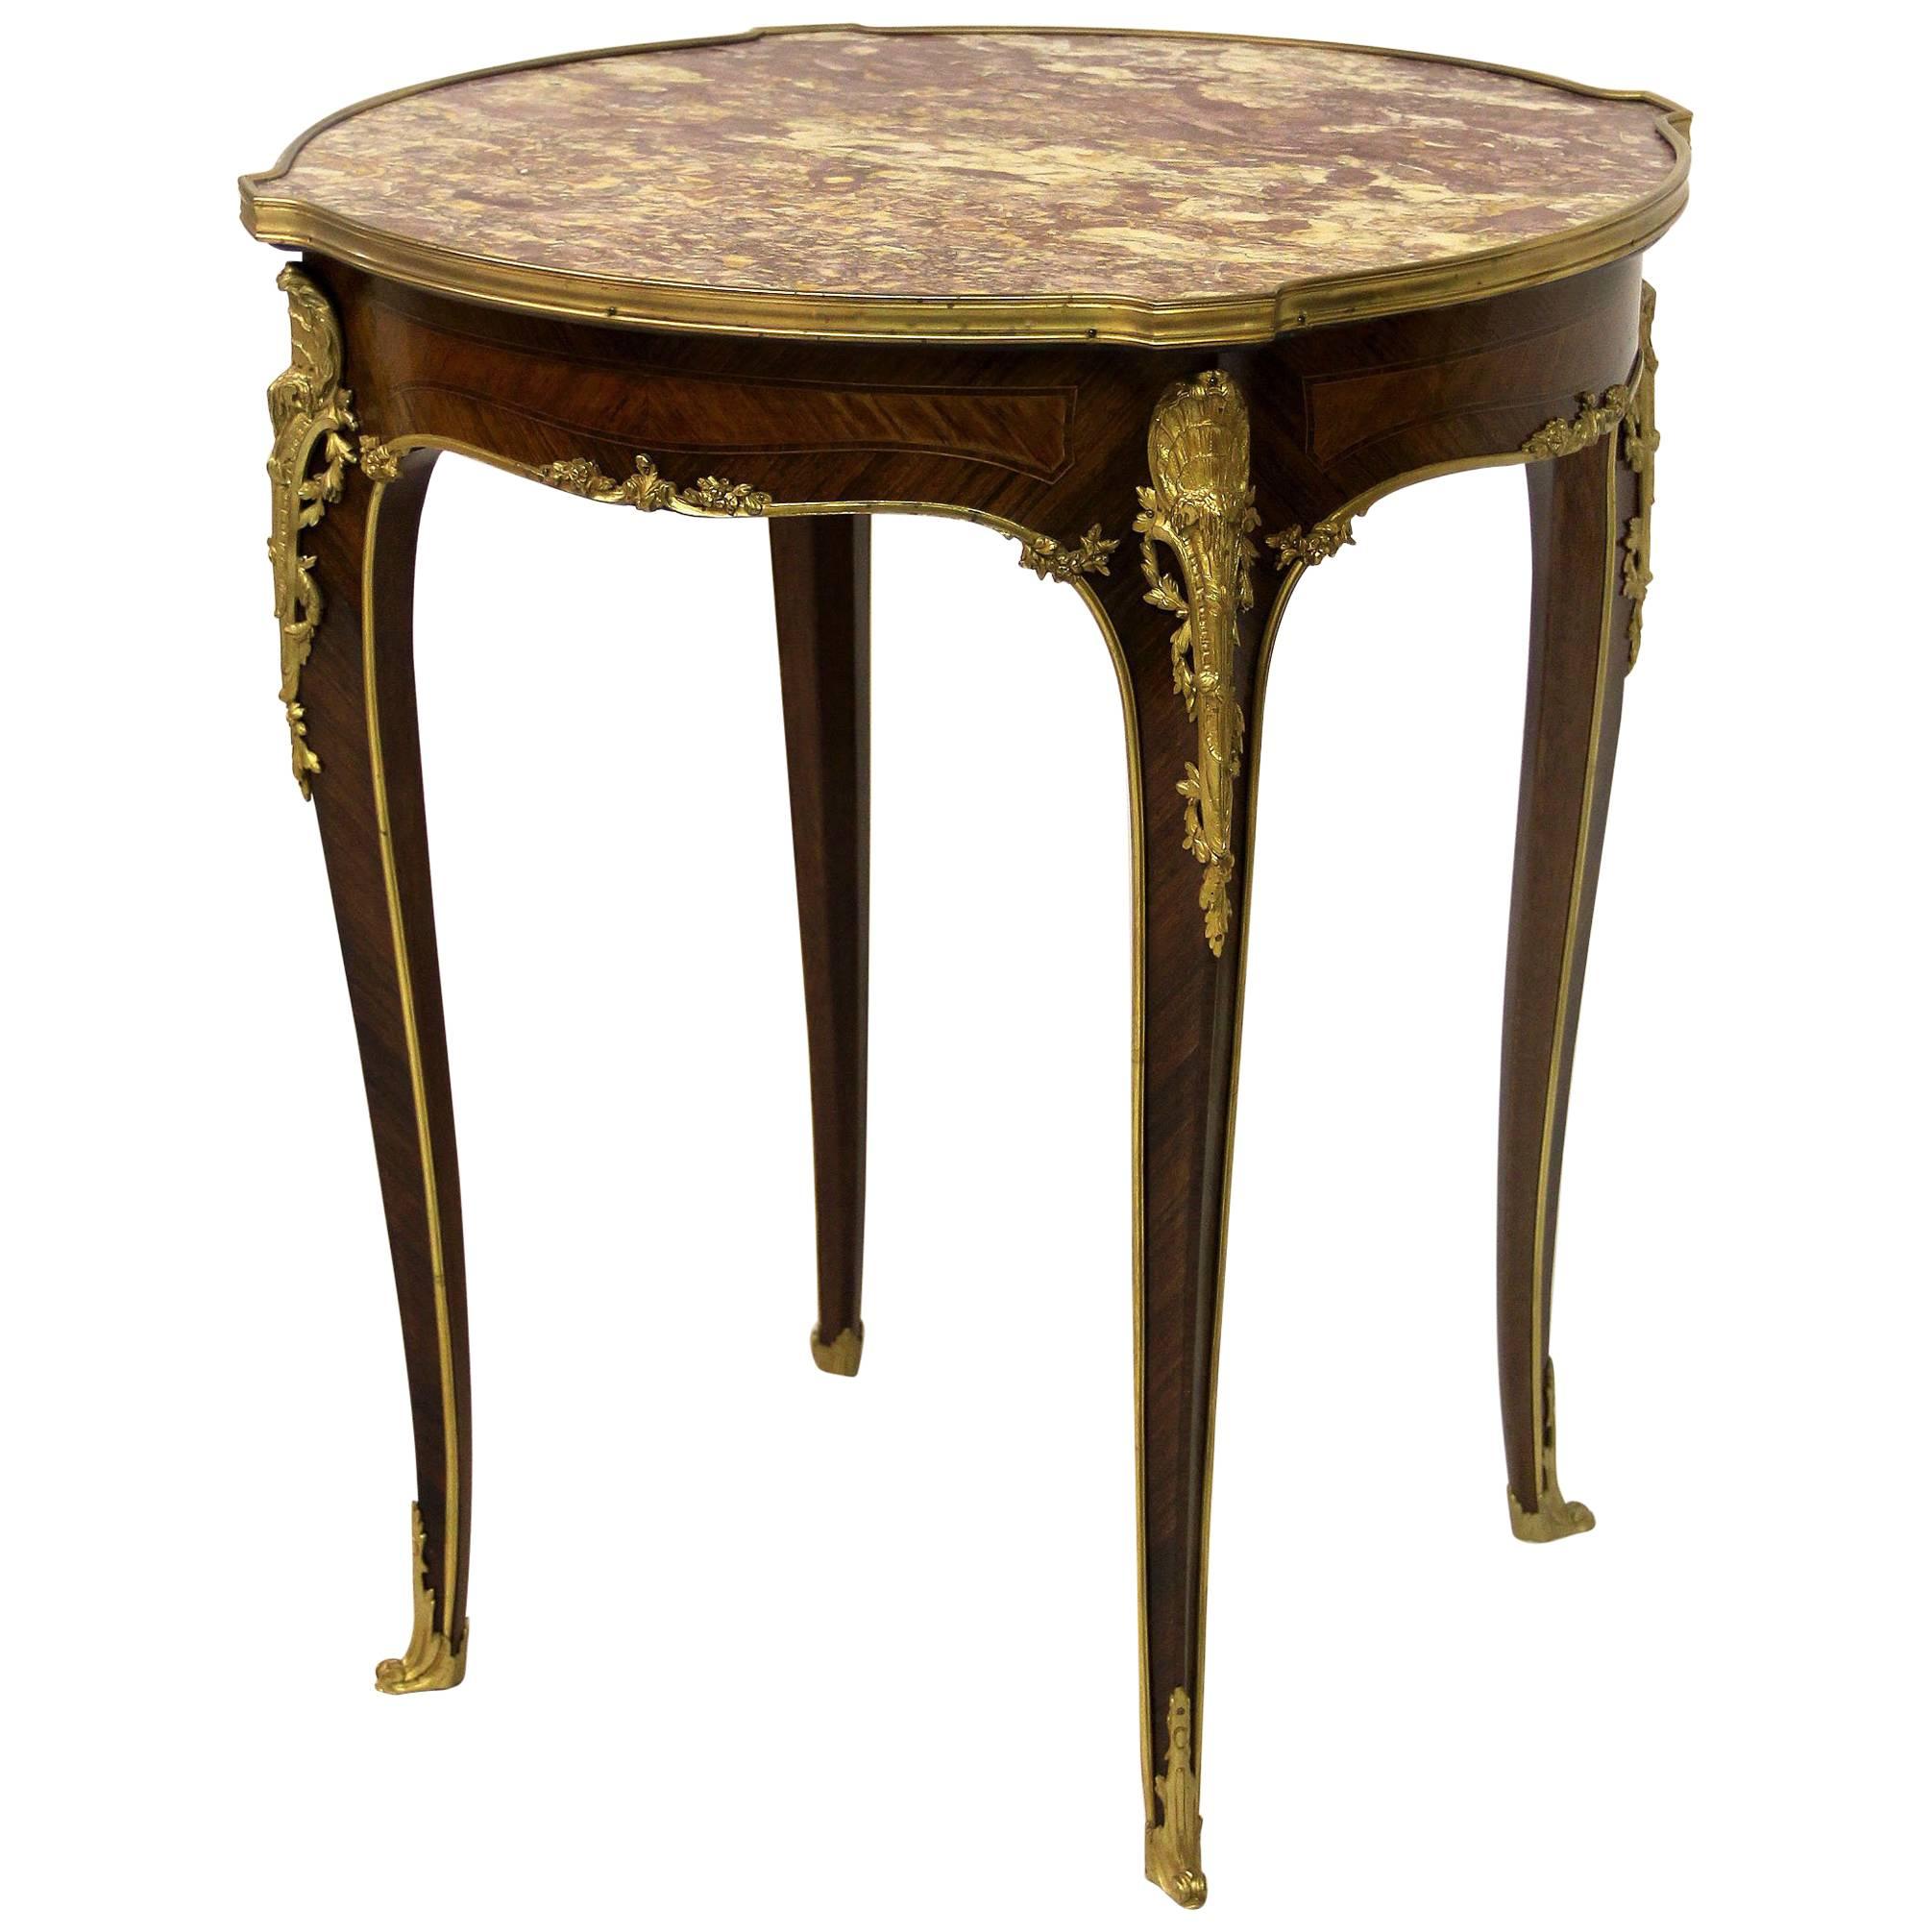 Late 19th Century Gilt Bronze Mounted Parquetry Lamp Table by Kahn